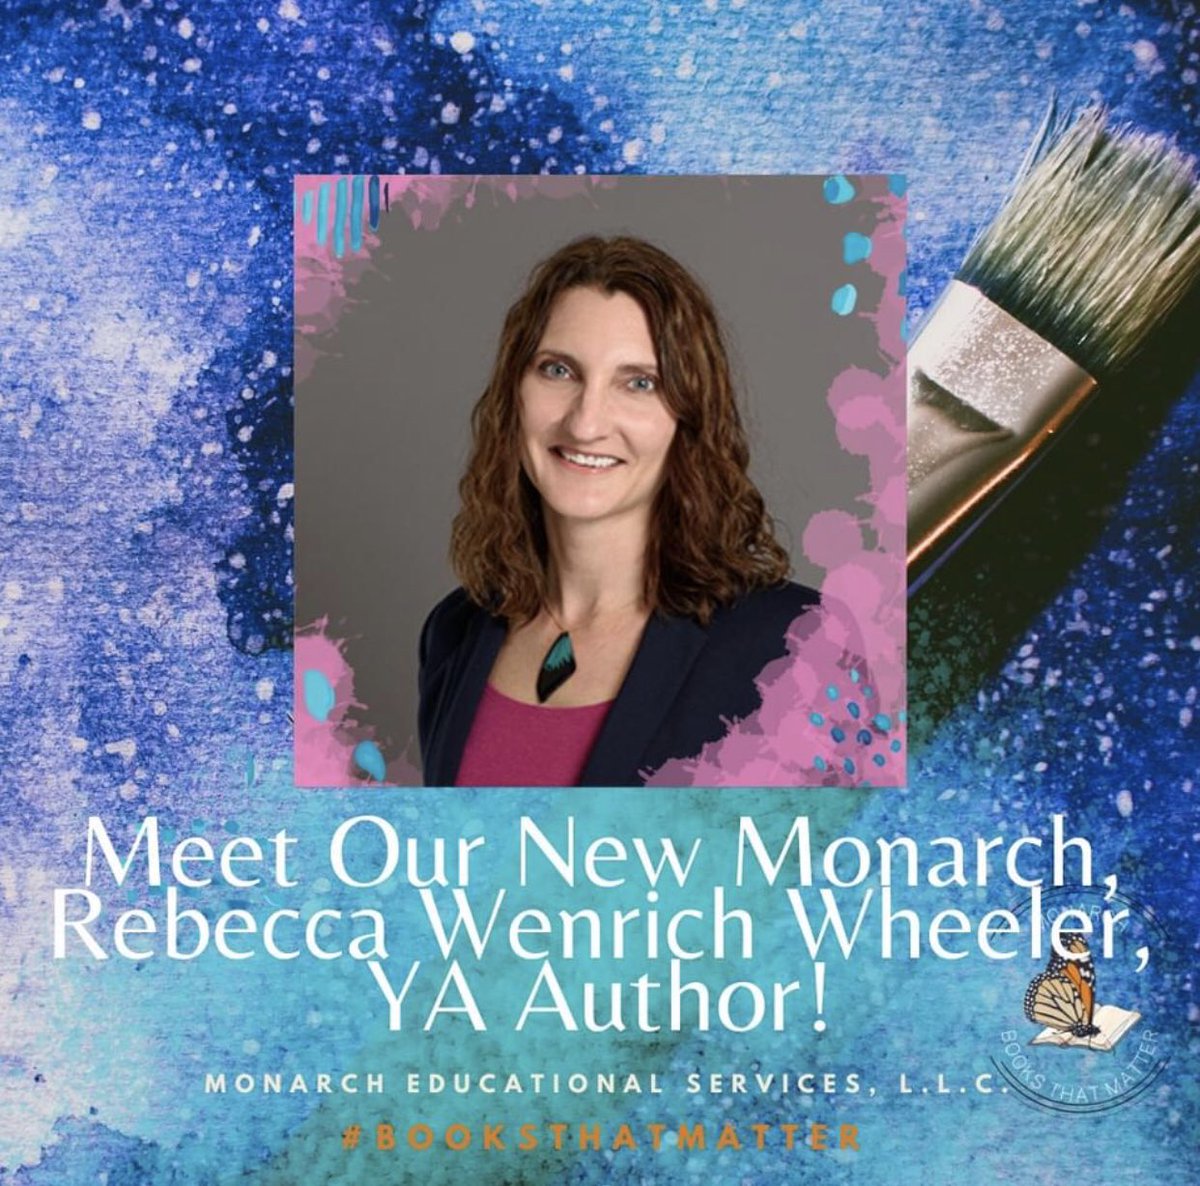 We are honored to announce that Rebecca Wenrich Wheeler is officially a Monarch! WHISPERING THROUGH WATER (1.4.23) is a YA contemporary you’ll love! #booksthatmatter #yaauthor